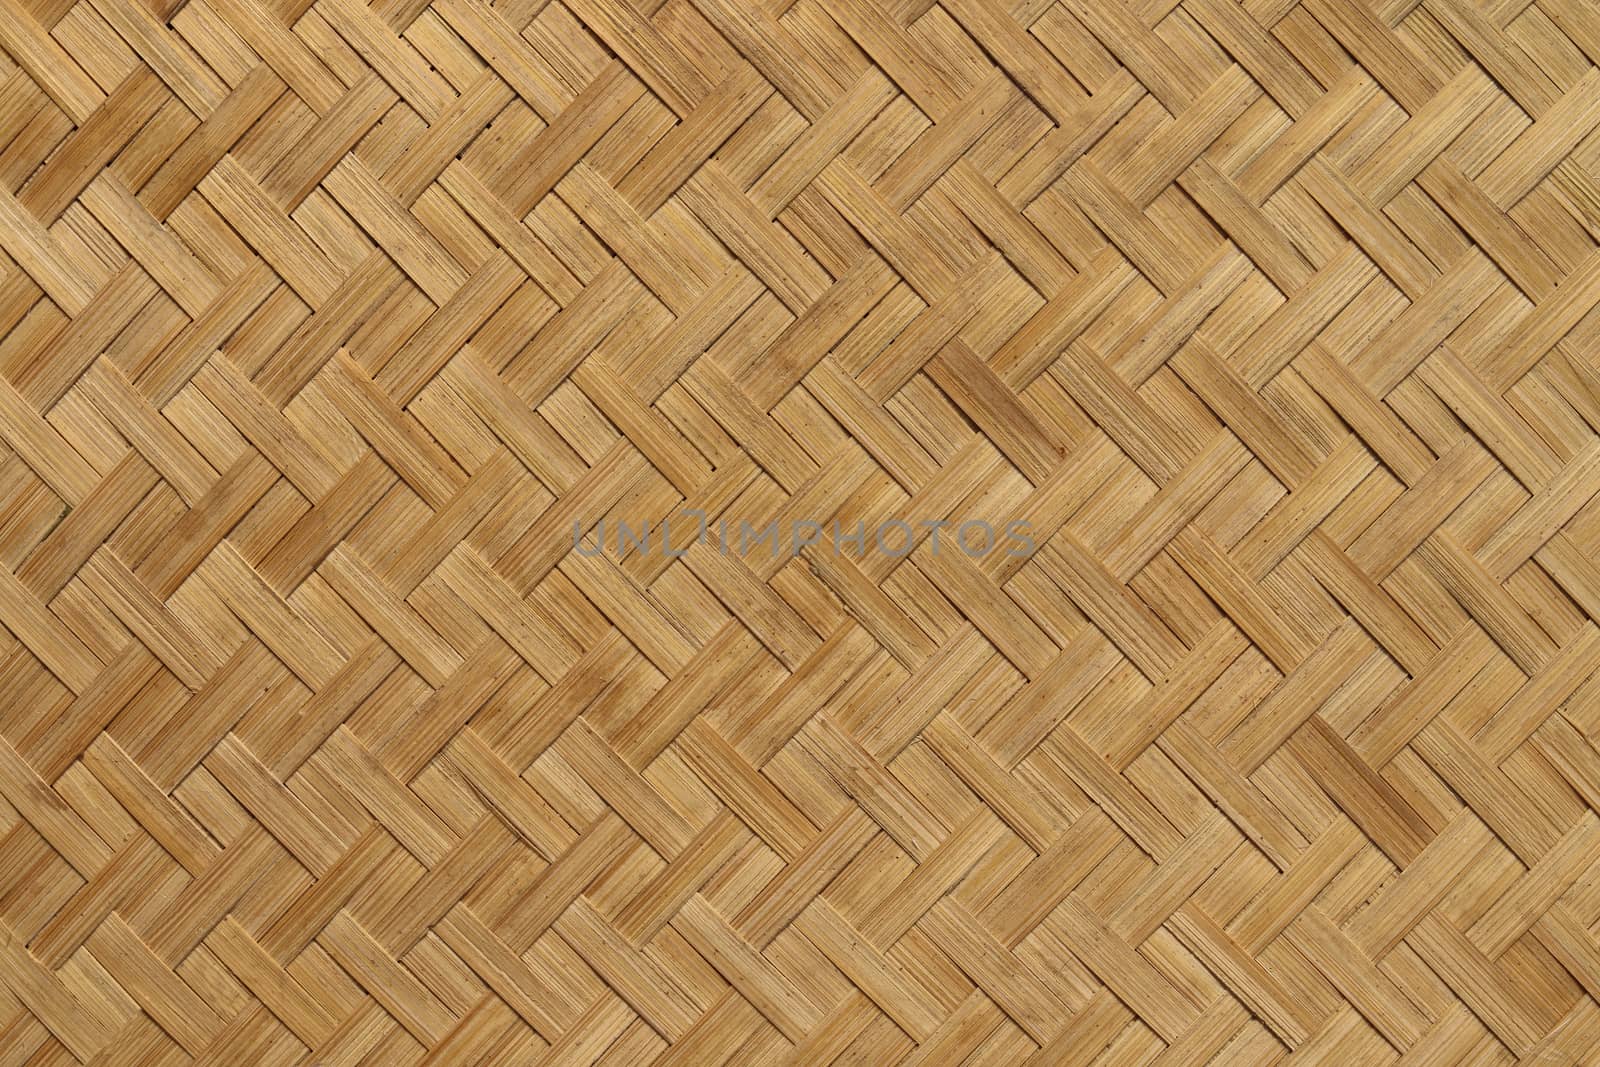 The basketwork in twill weave pattern made from bamboo.